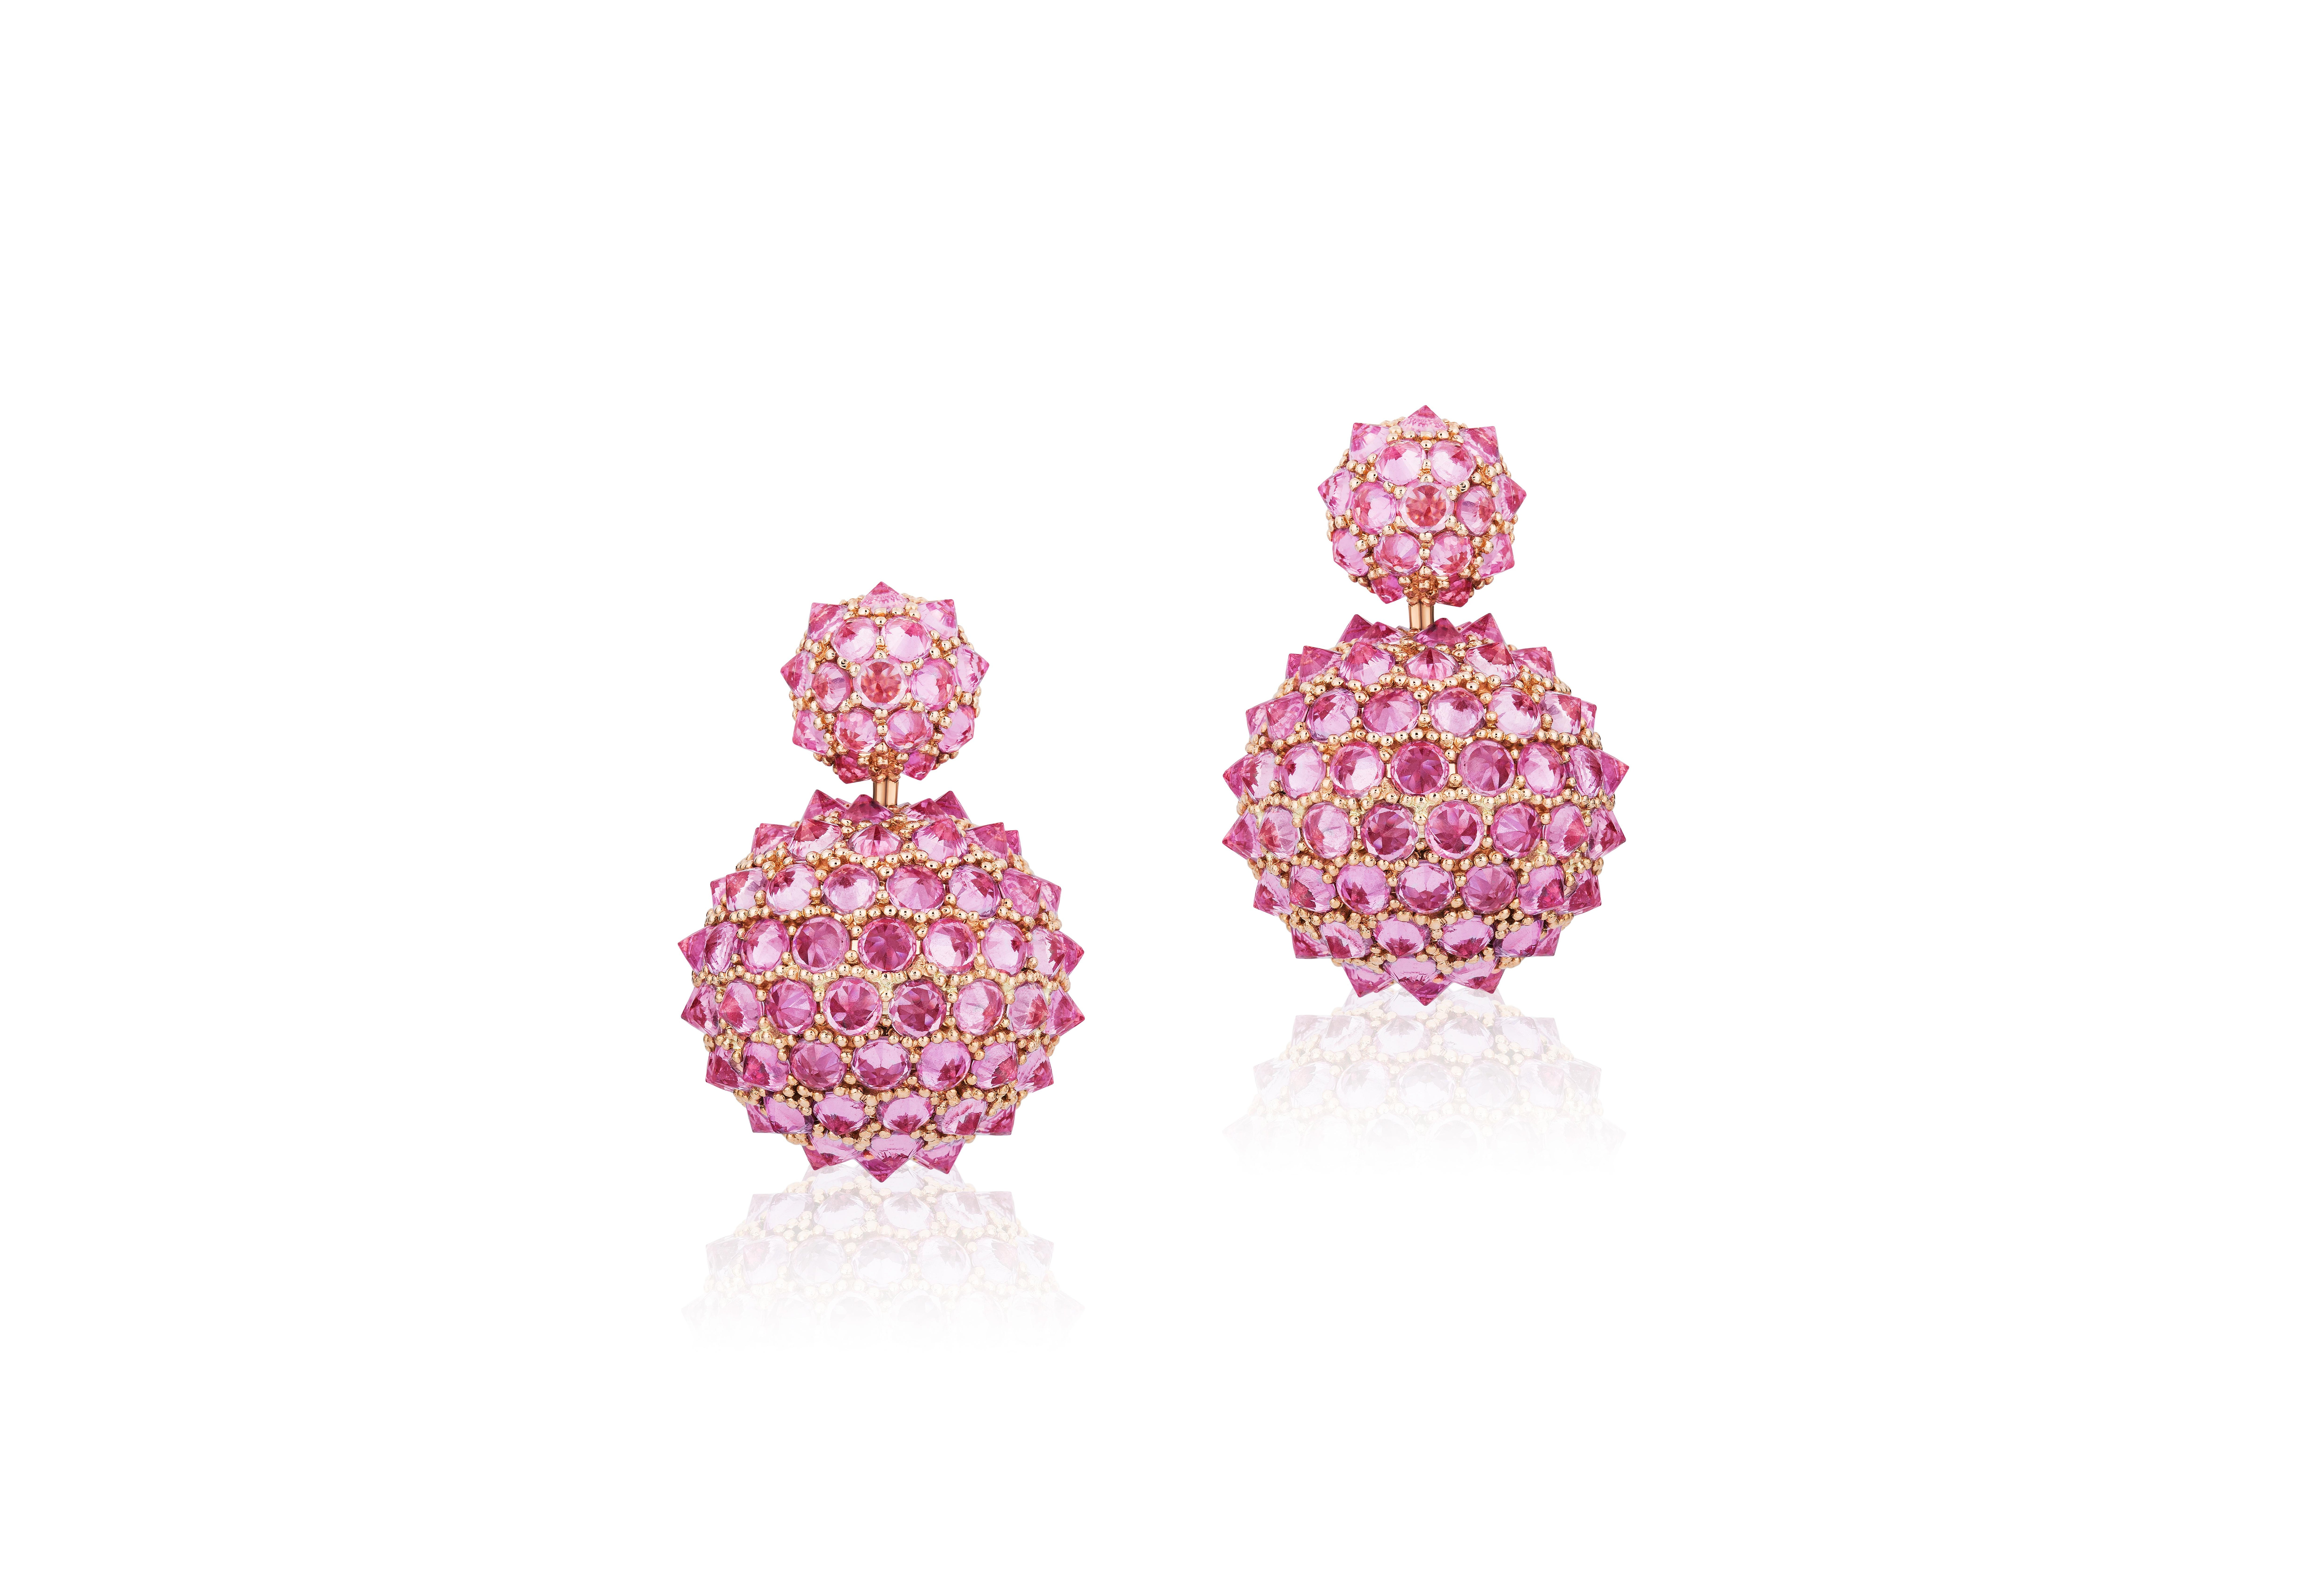 Pink Sapphire Double Ball Drop Earrings in 18K Rose Gold, from 'Limited Edition'.
These limited edition items are just that! Limited! 

Feel the exclusiveness in every piece from this collection and Feel the love in these limited edition creations